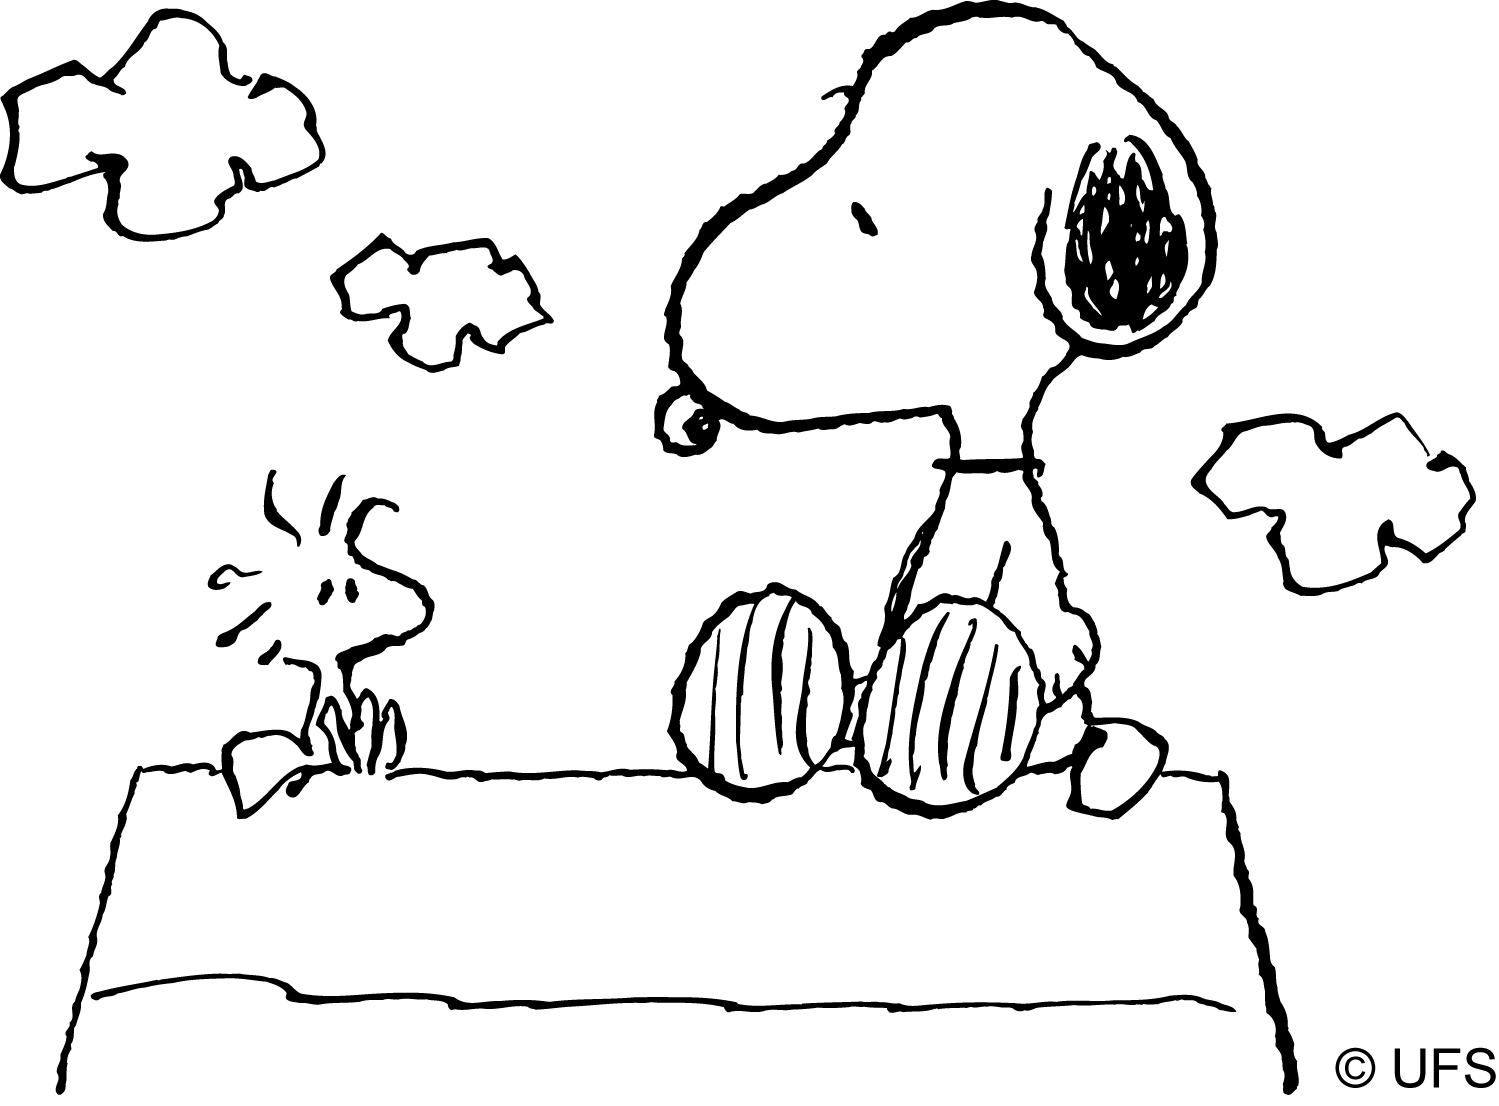 peanuts characters coloring pages